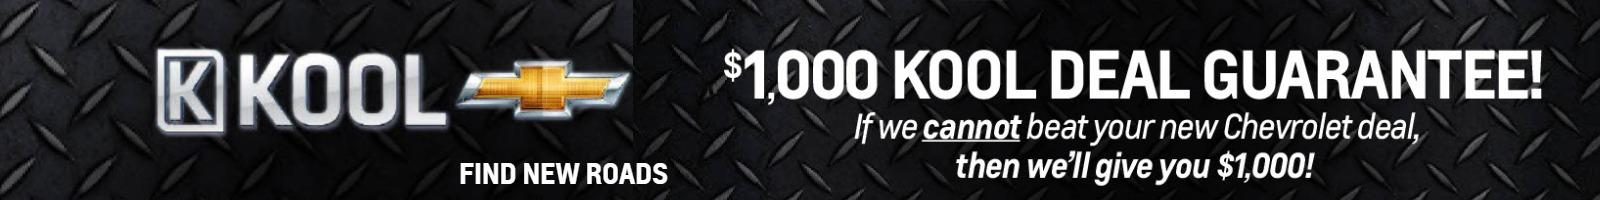 $1000 Kool  deal  guarantee!
If we cannot beat your new Chevrolet deal, then we'll give you  $1,000!